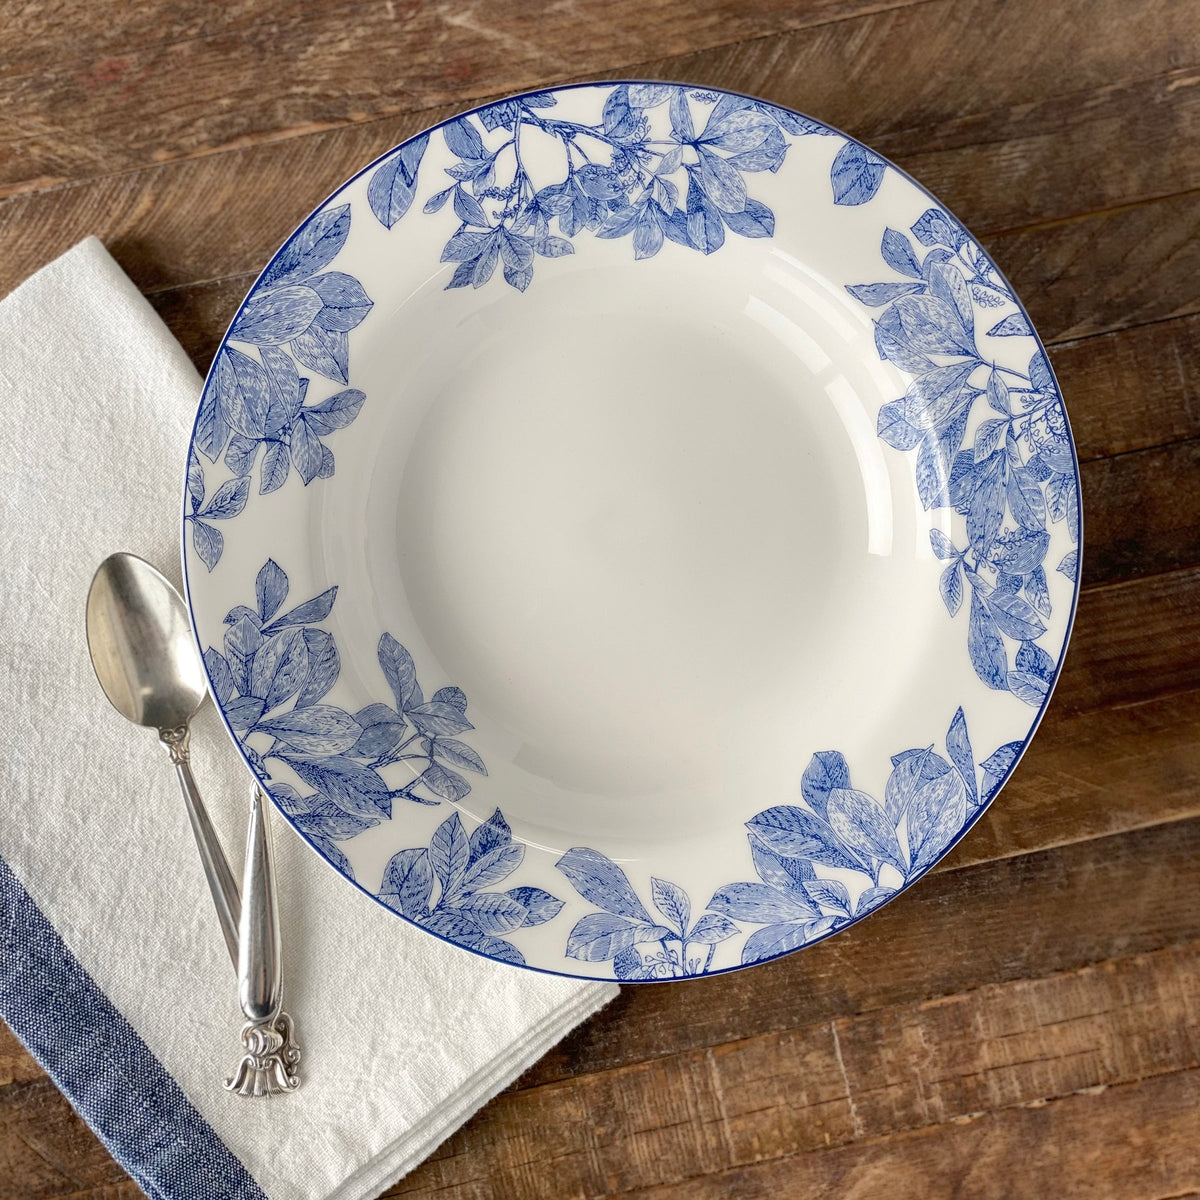 A classic **Arbor Rimmed Soup Bowl** made of high-fire porcelain with blue floral patterns by **Caskata Artisanal Home** is placed on a wooden table. To the left, there is a folded white cloth with a blue stripe, and a silver spoon rests on it. The bowl is not only elegant but also dishwasher safe.